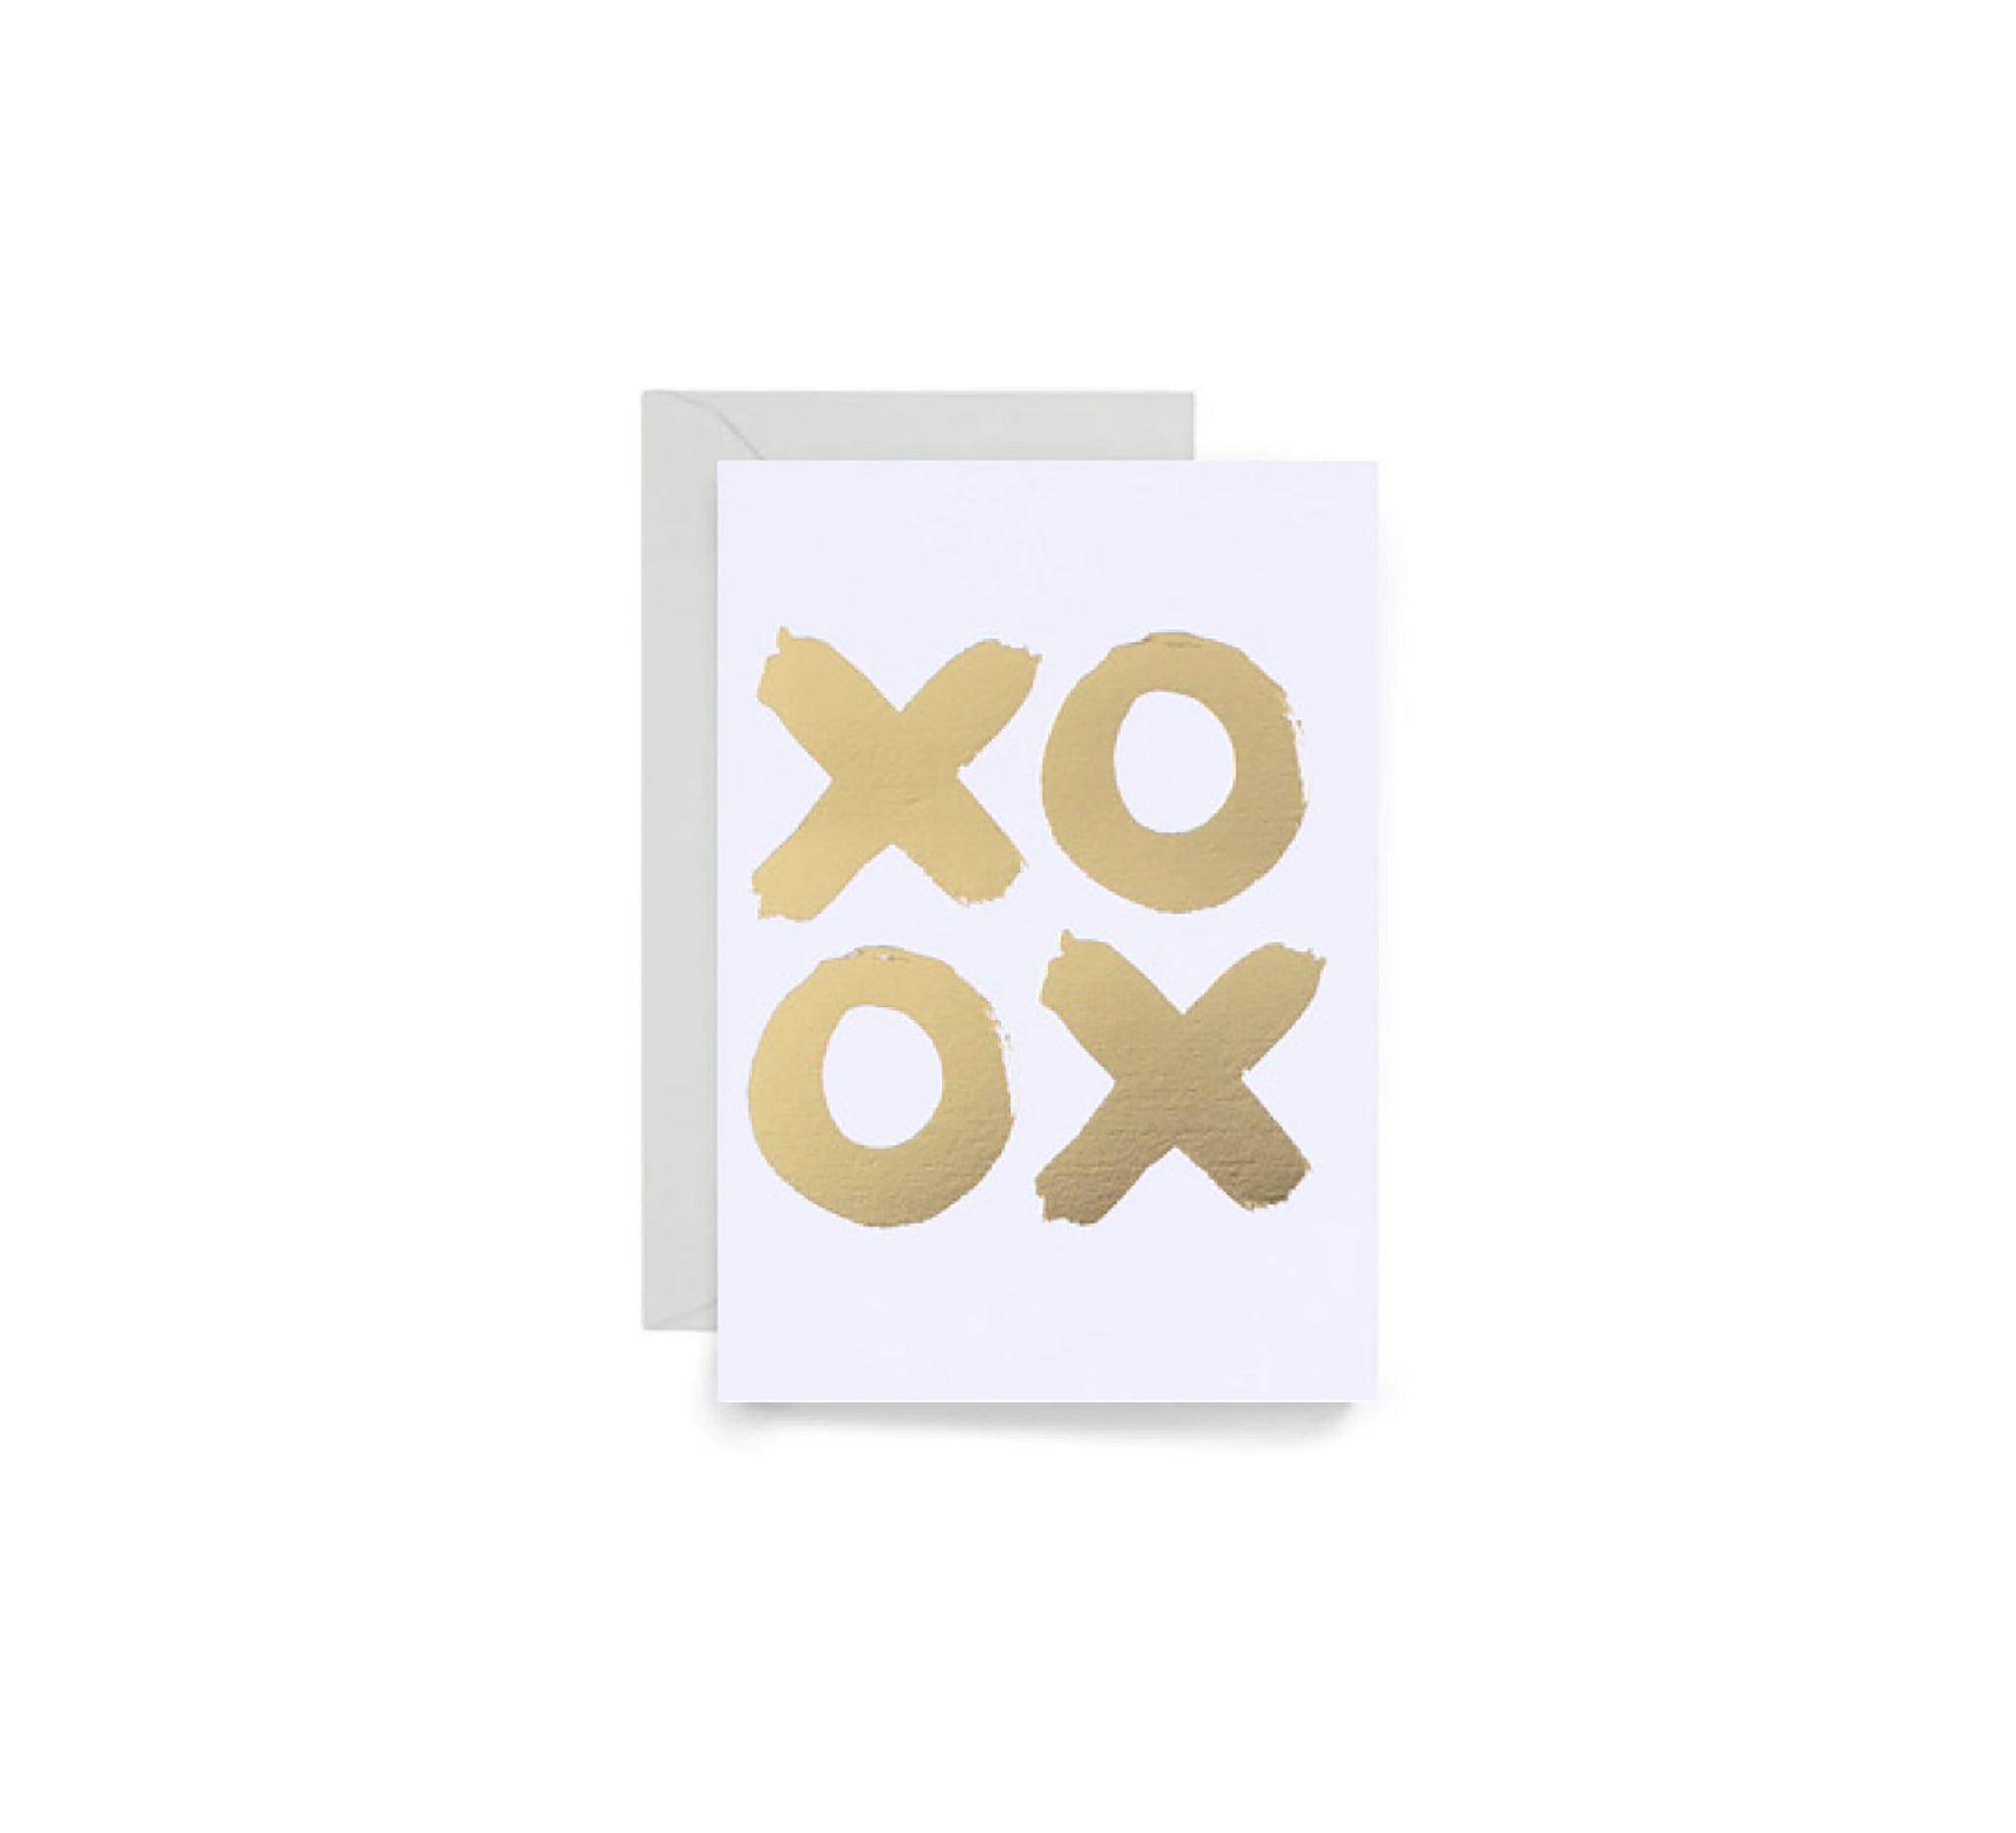 21. XOXO CARDS - (PACK OF 6)